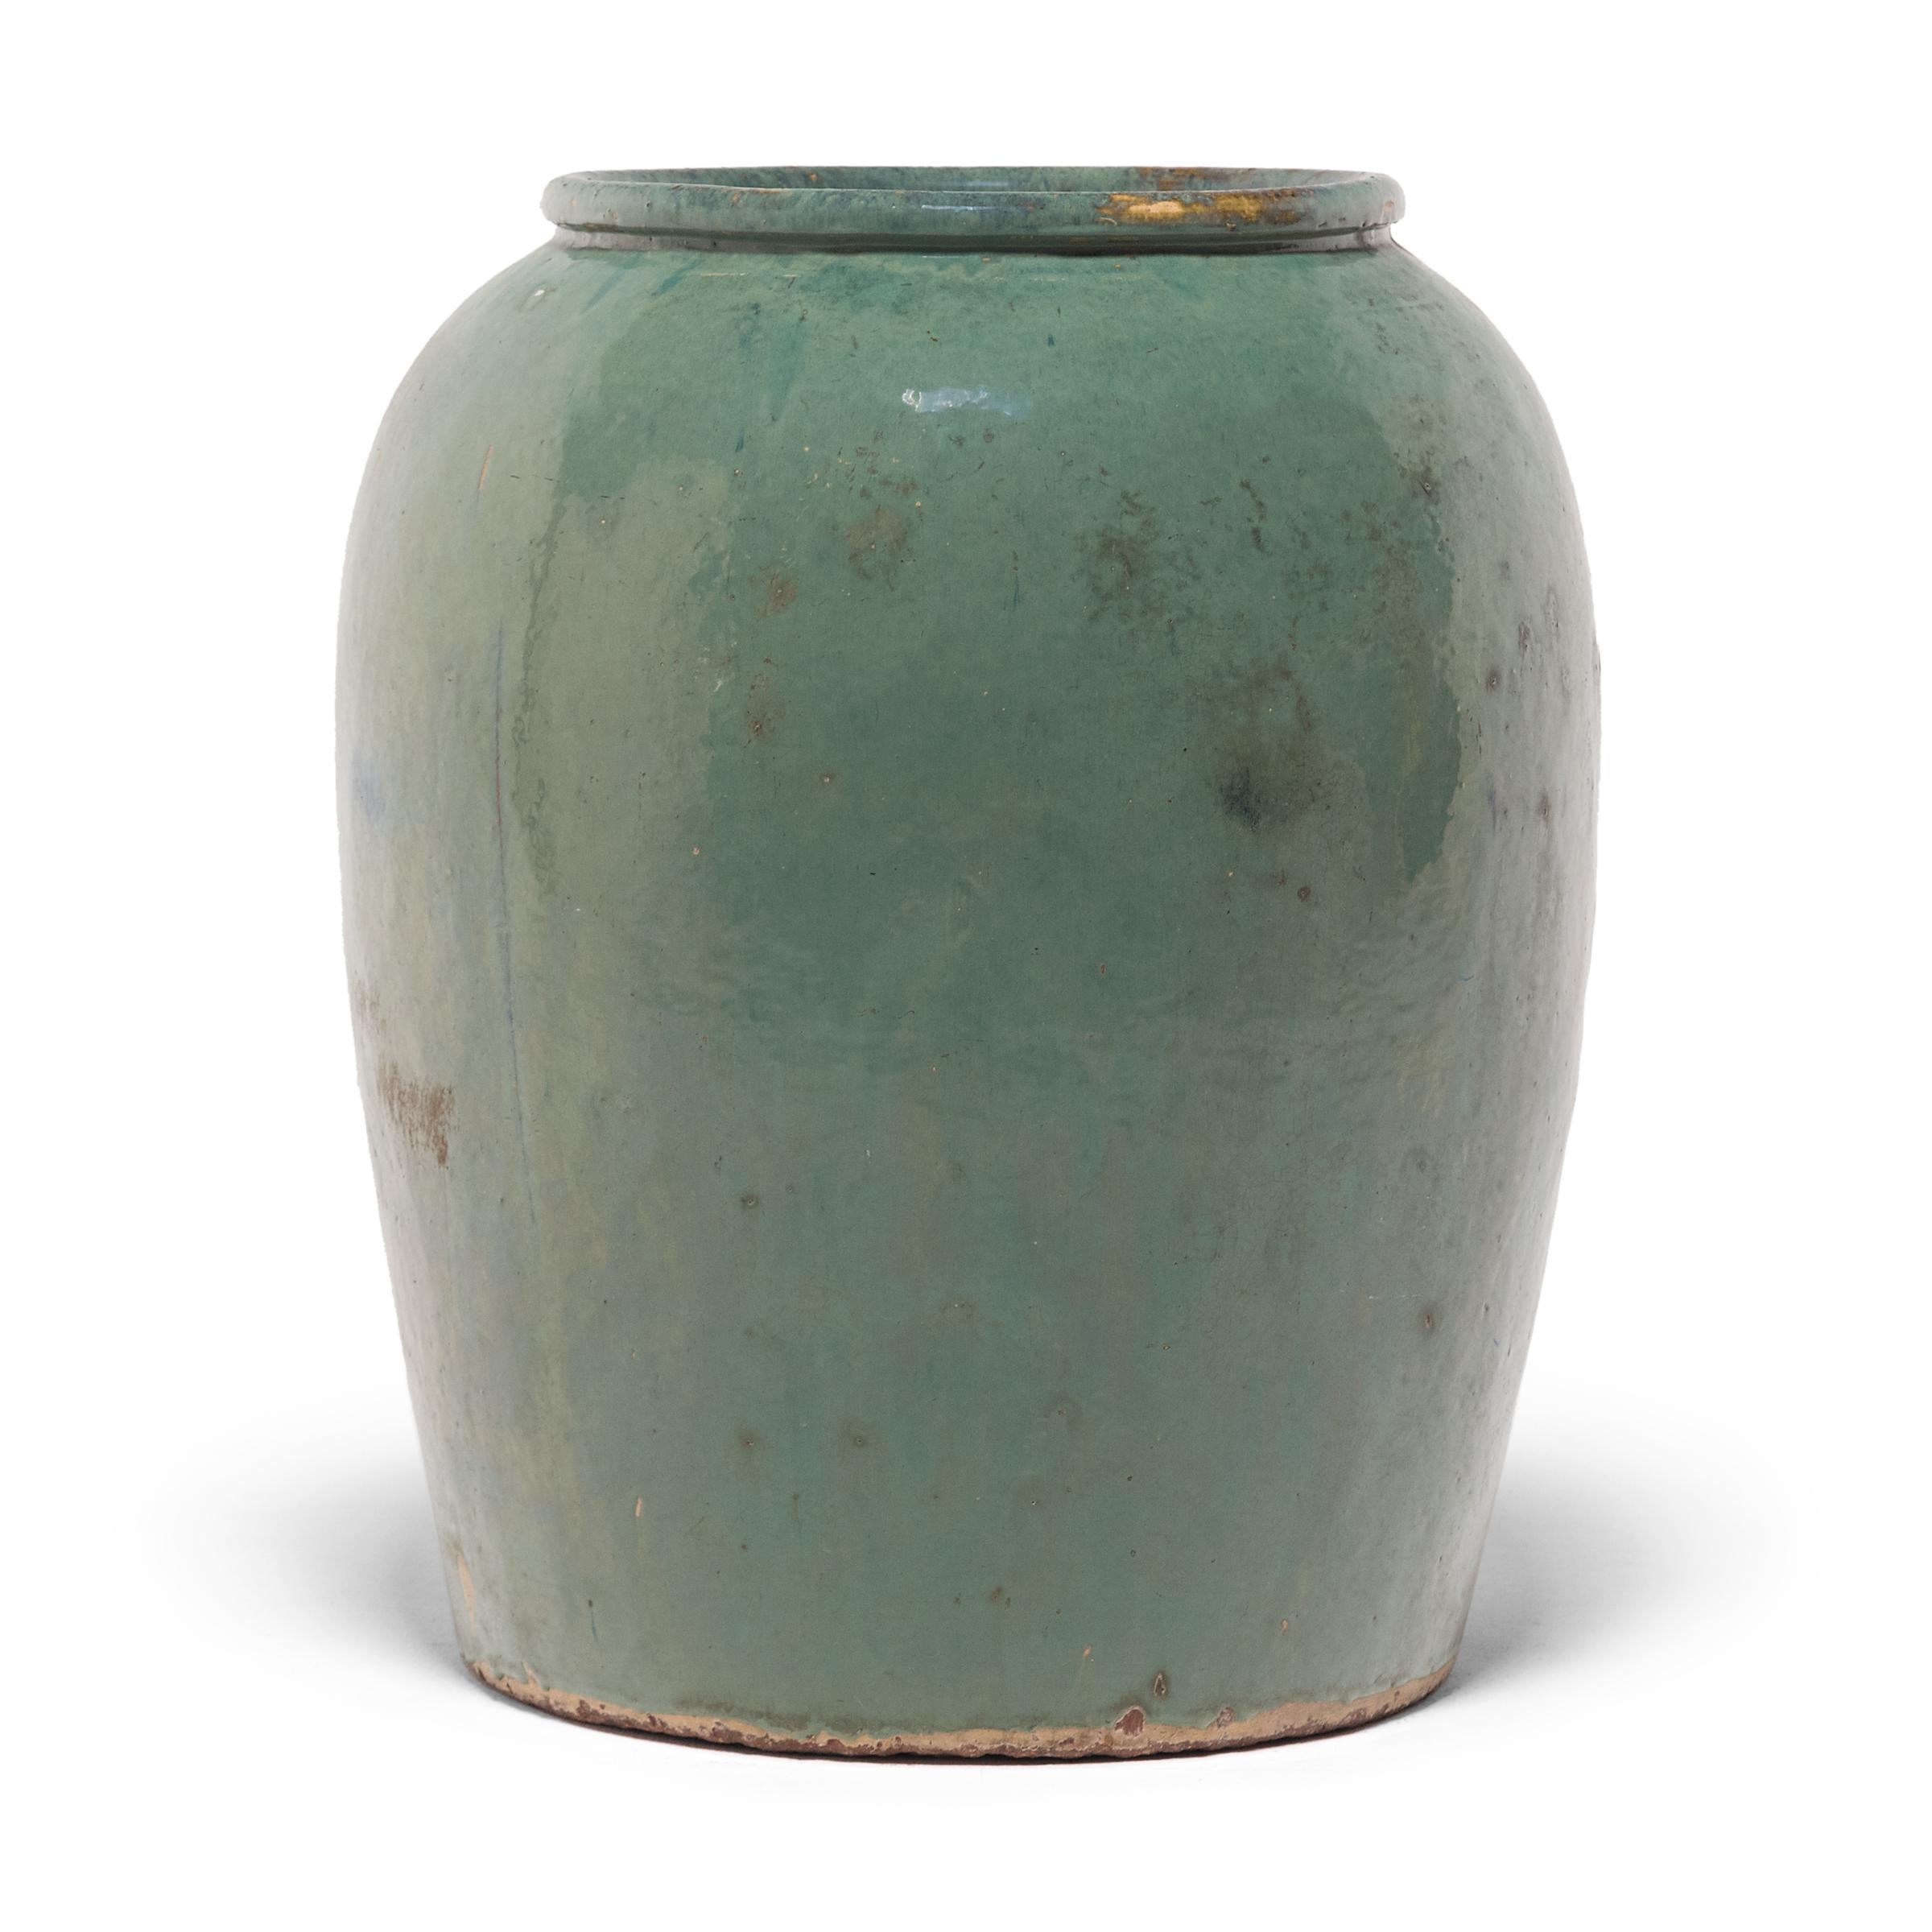 Originally used for pickling foods, this monumental early 20th-century ceramic vessel is cloaked in a beautiful celadon blue-green glaze. As the ocean colored glaze dripped down the rounded sides, lingering on each imperfection, a range of